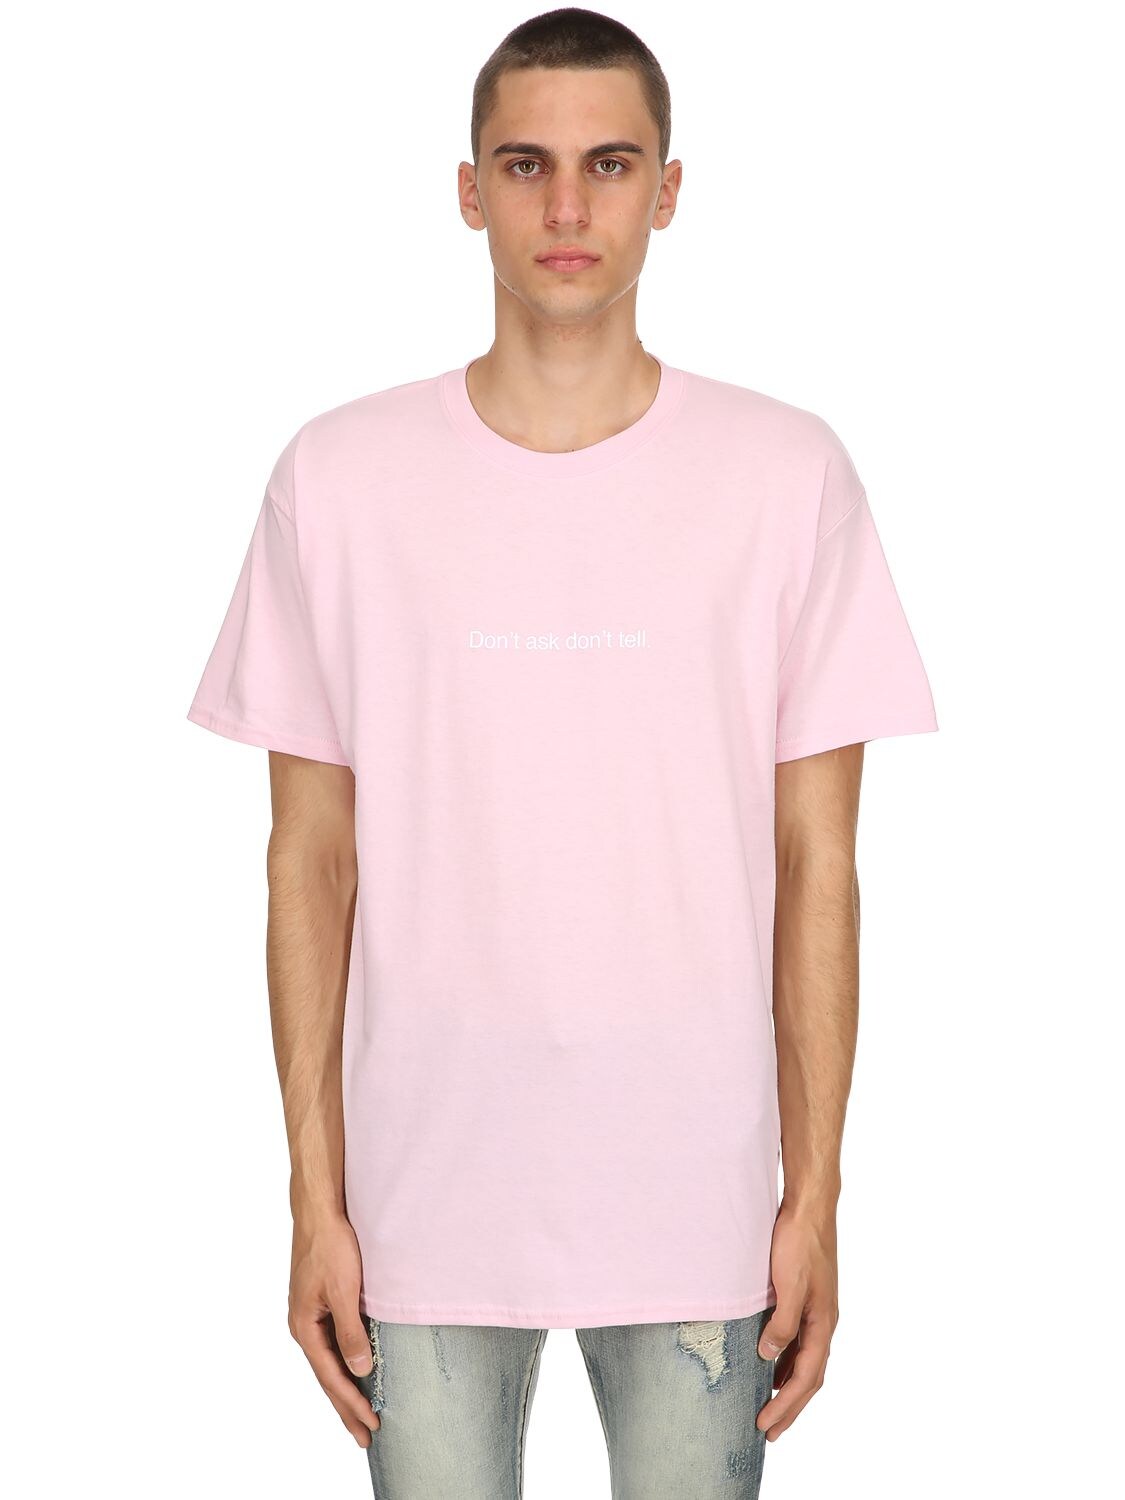 Famt - Fuck Art Make Tees "don't Ask, Don't Tell"纯棉t恤 In Pink